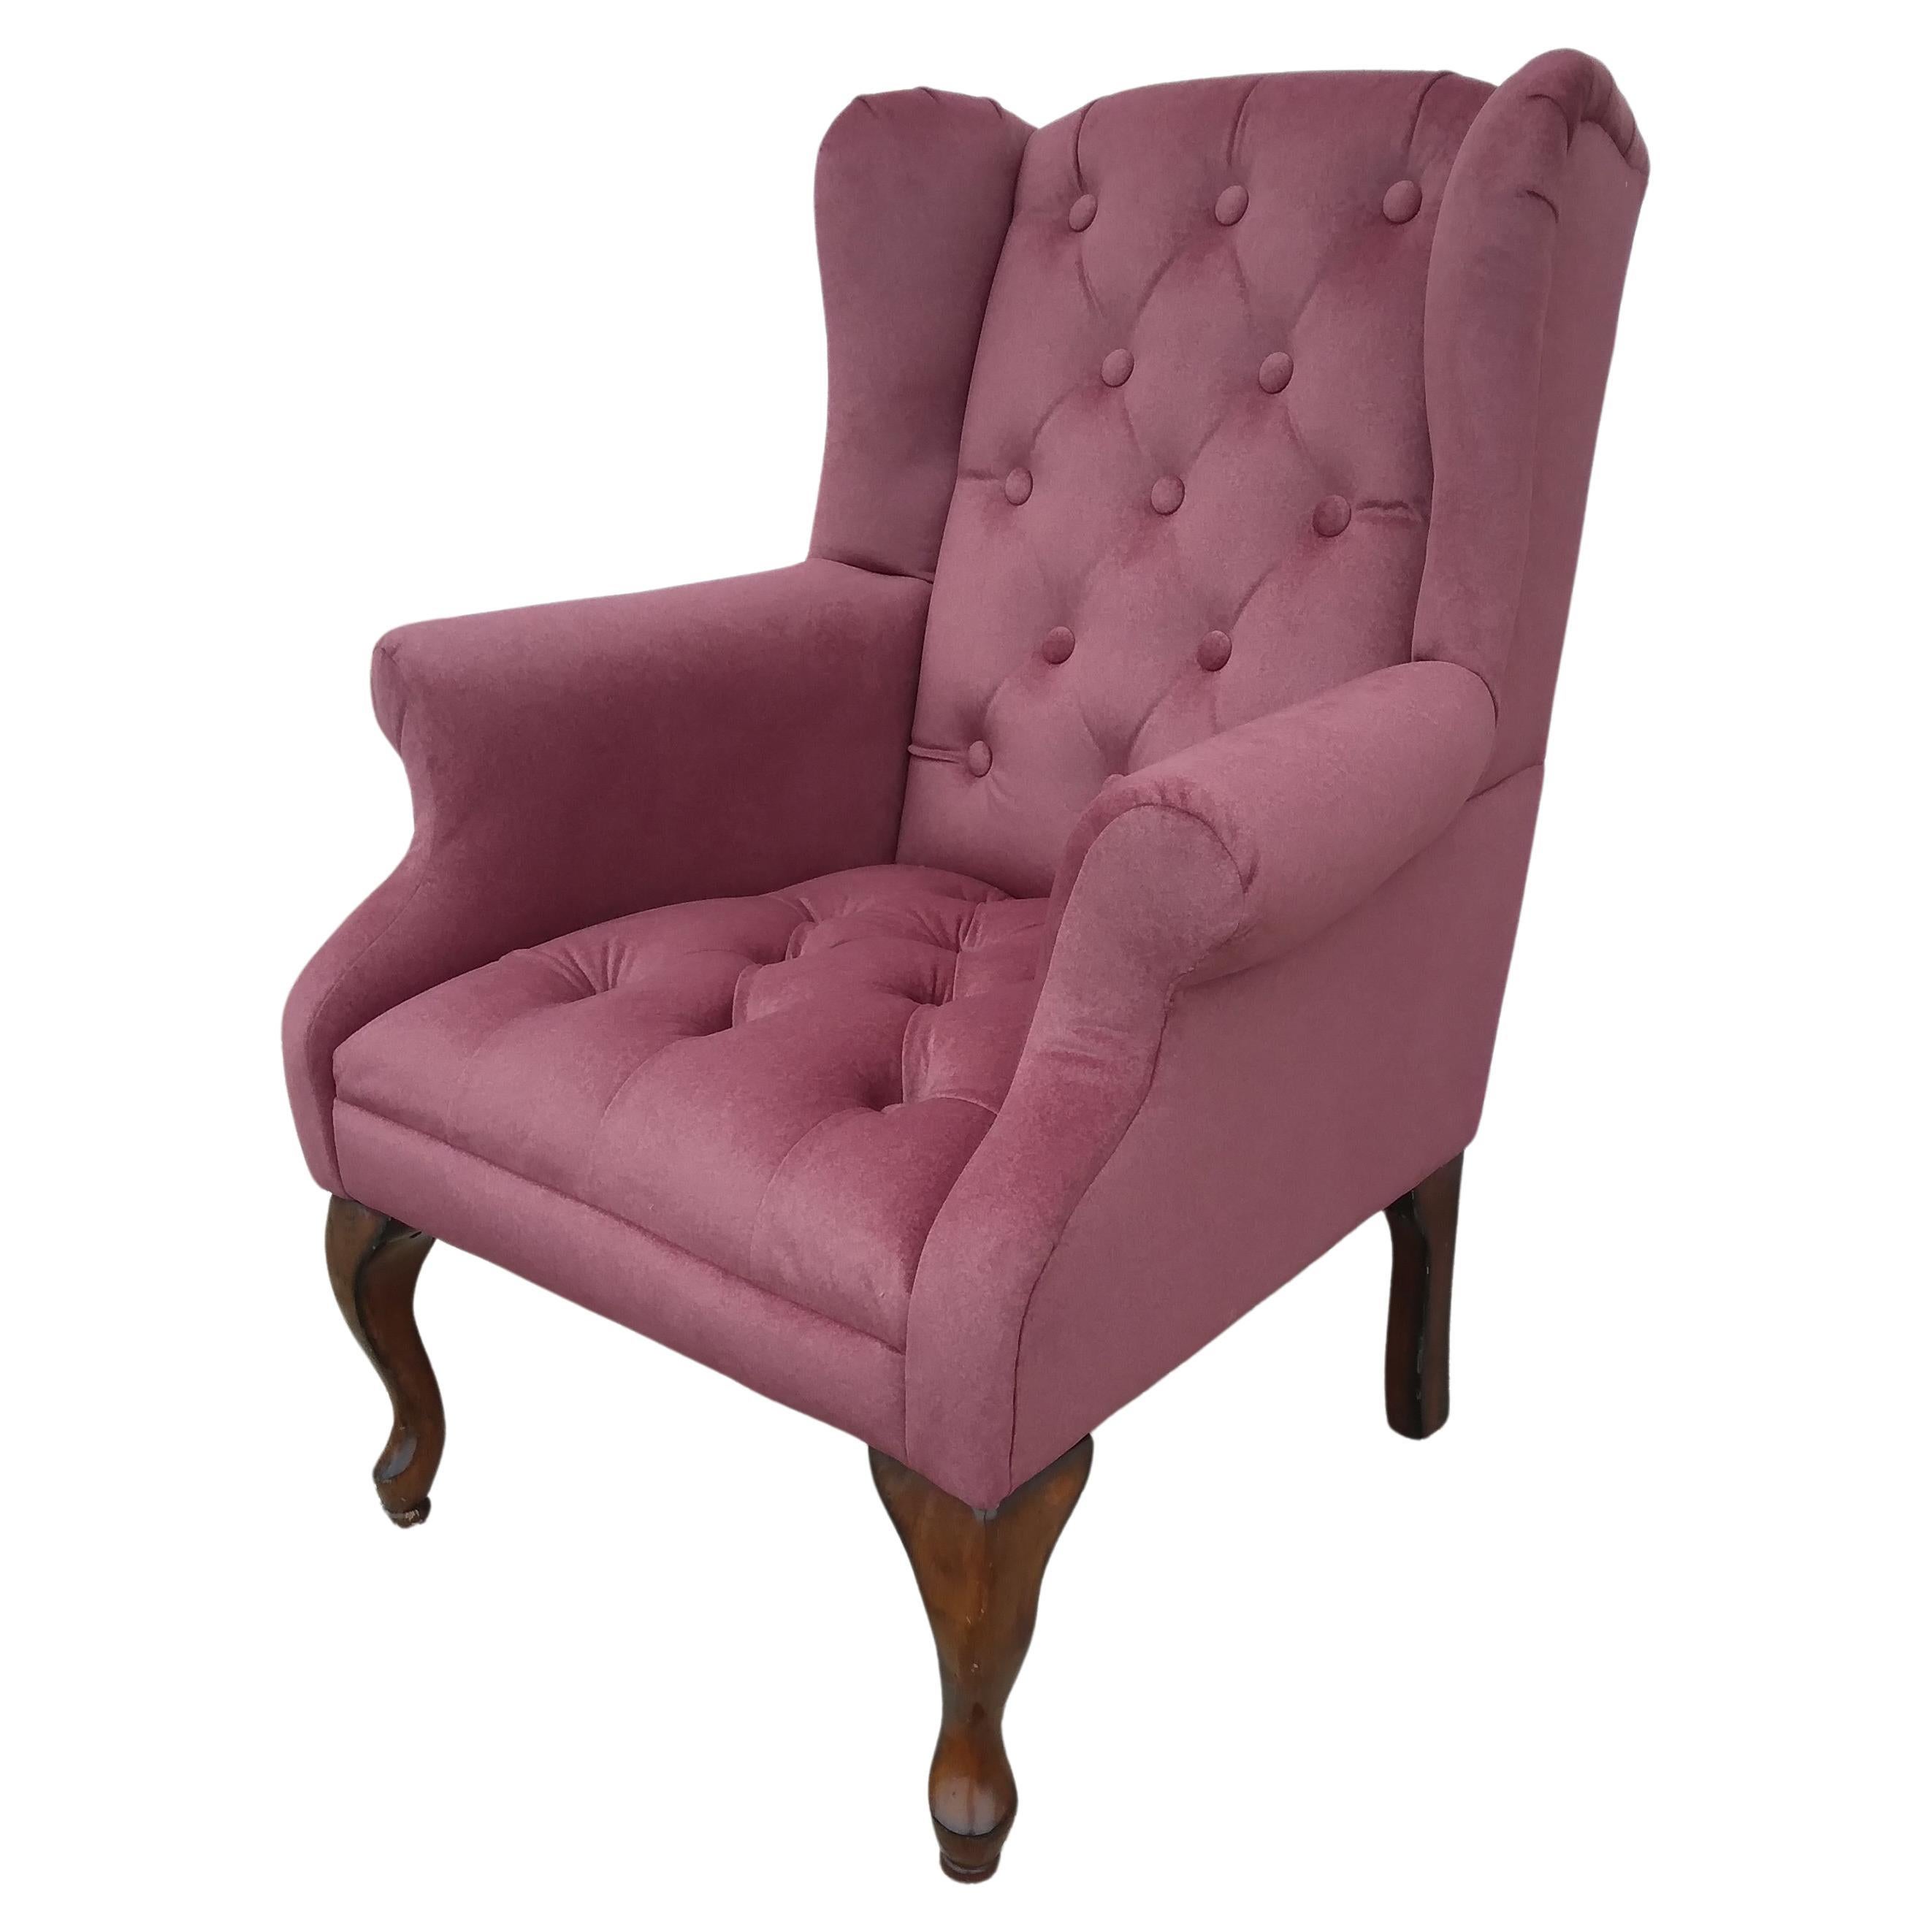 Vintage Tufted Wingback Chair aus rosa Chenille im Angebot